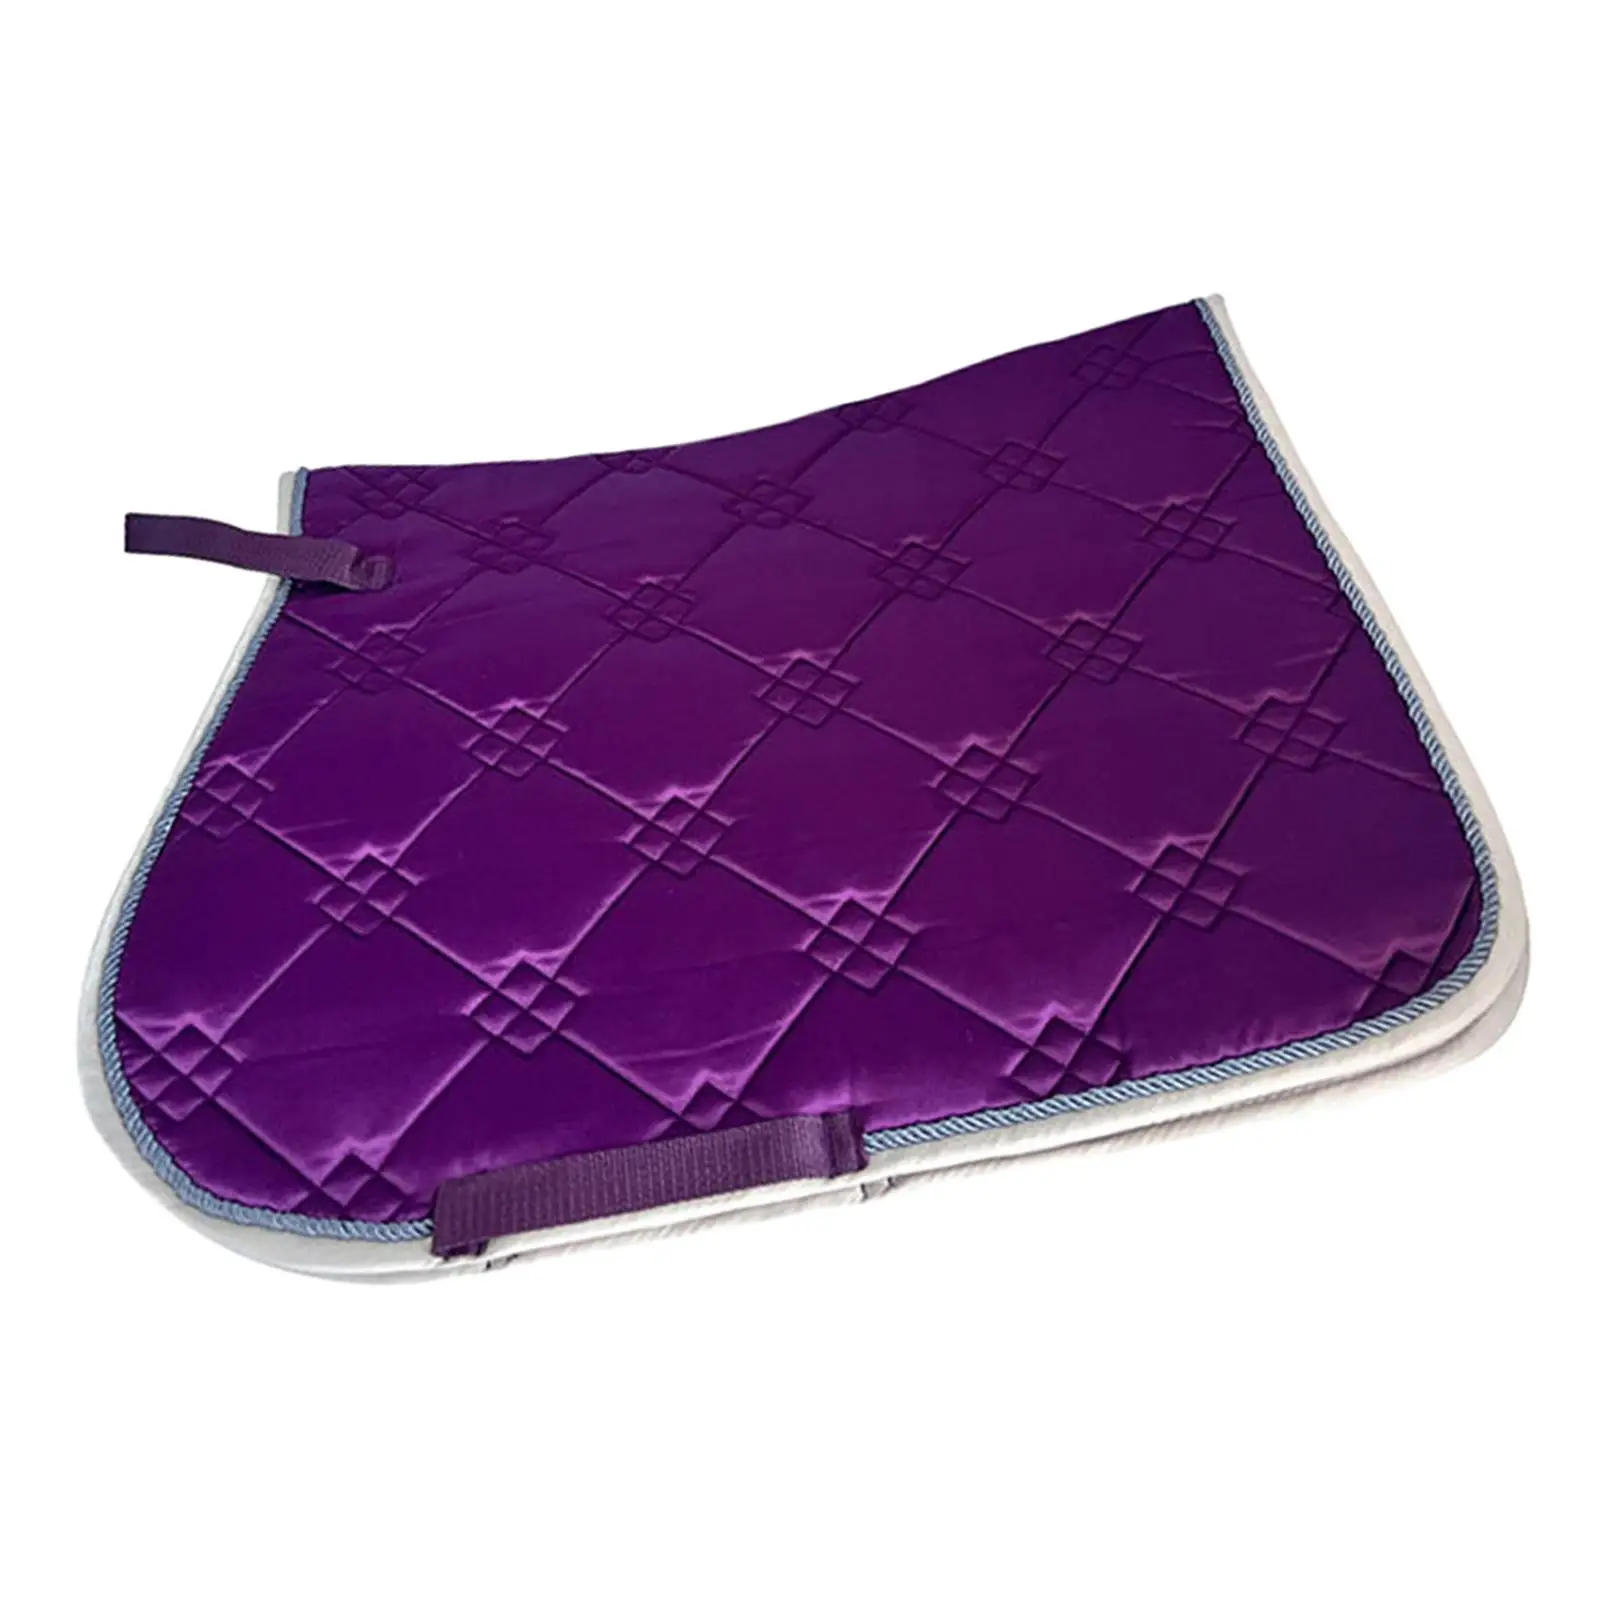 Saddle Pad for Horse Dressage Pad Breathable Protective Accessories Sponge Lining Padding Nonslip Thickening Saddle Shock Pad